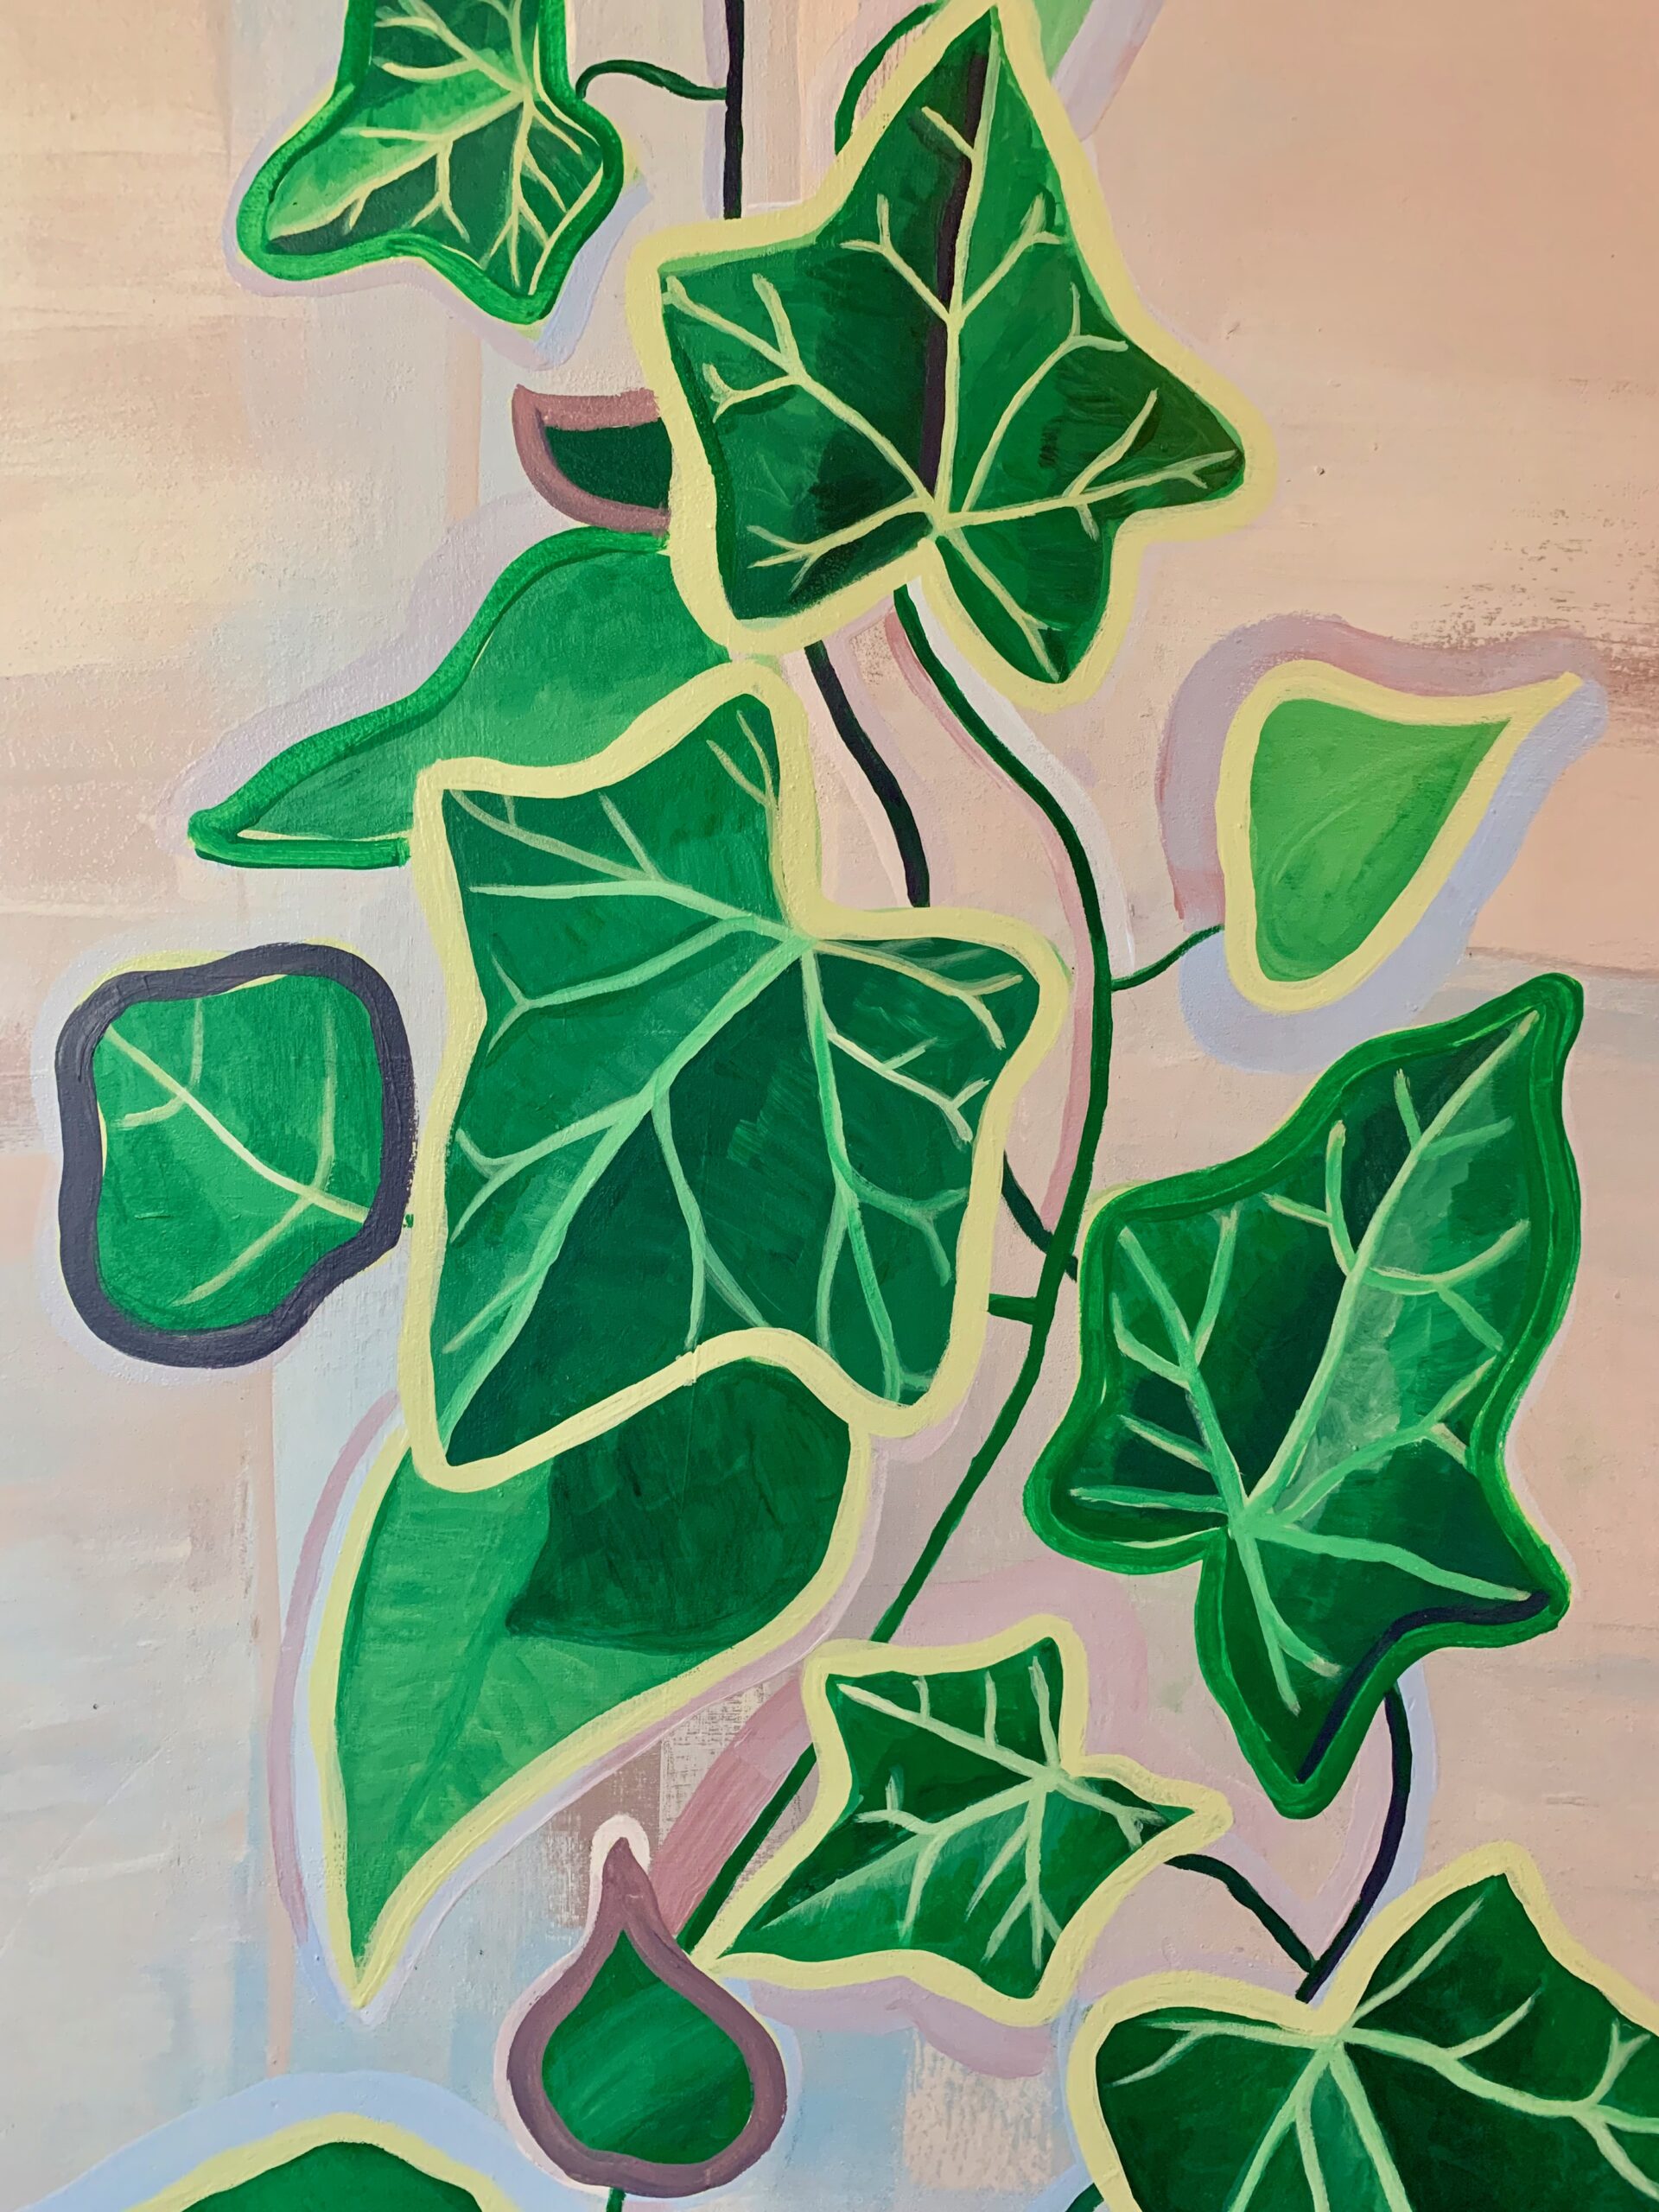 A close-up painting of stylized leaves against a lavender background